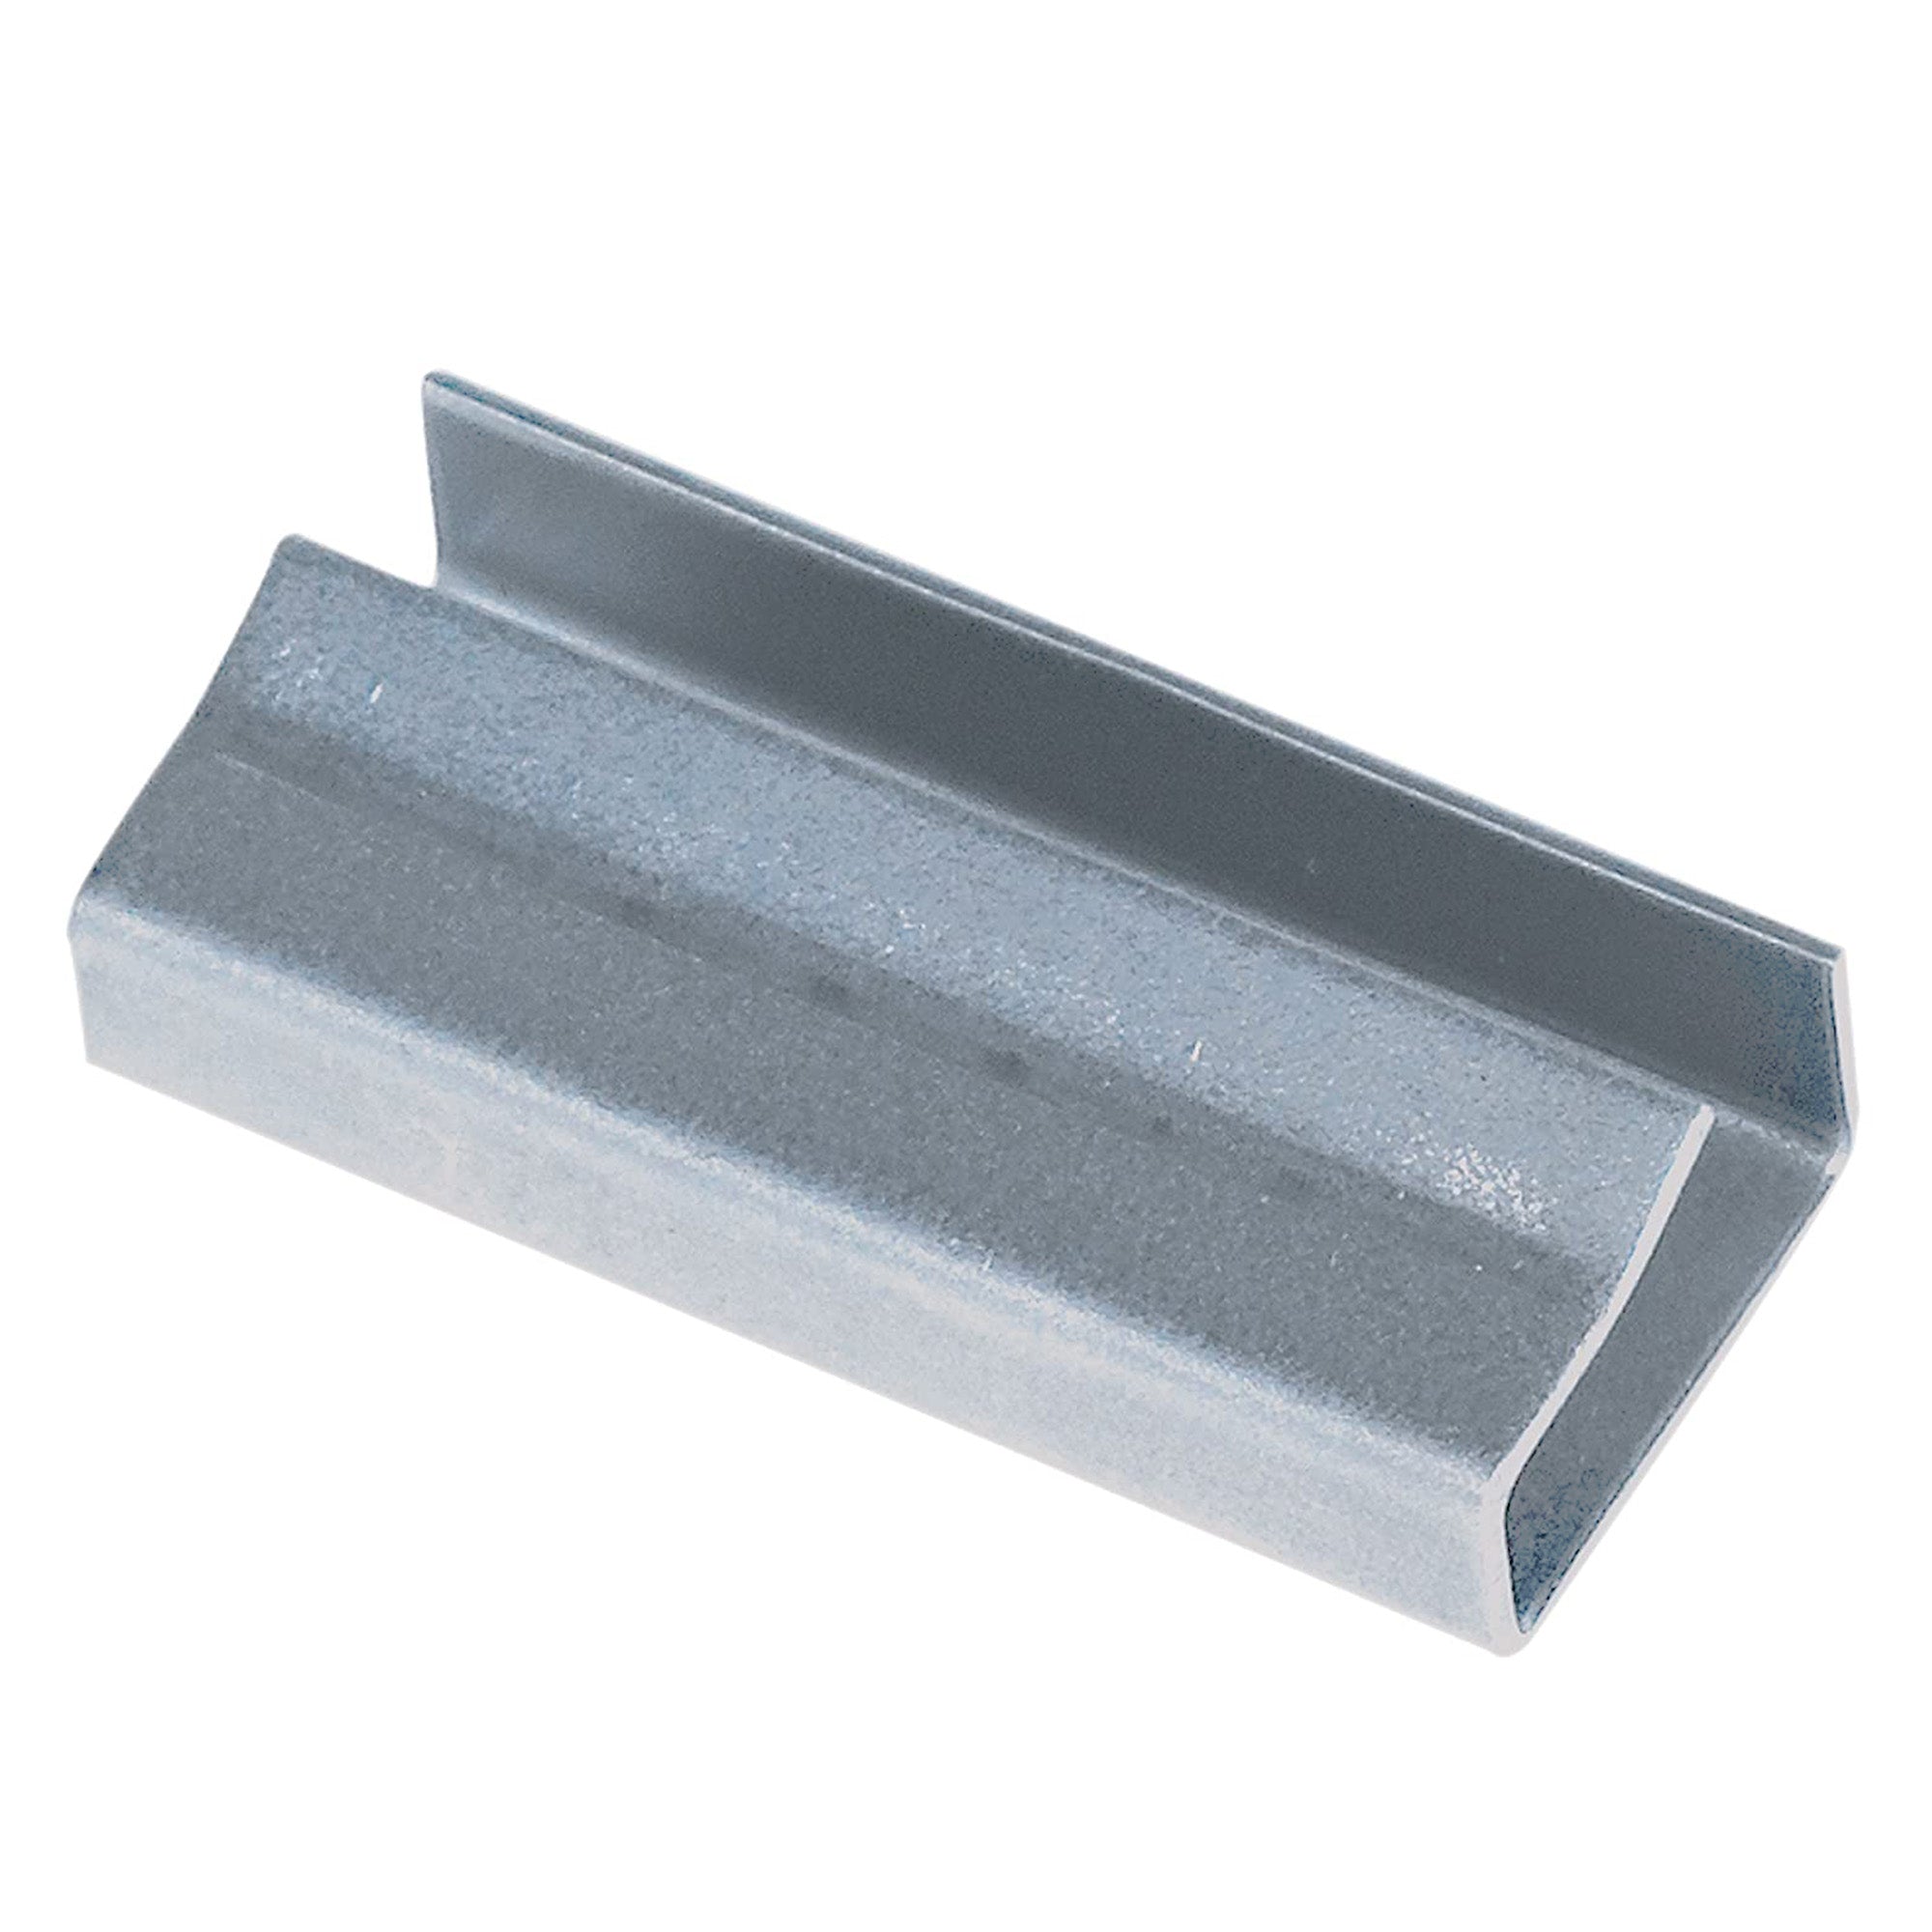 1/2 x 1¼ Open Steel Strapping Seals - Metal Banding Clips